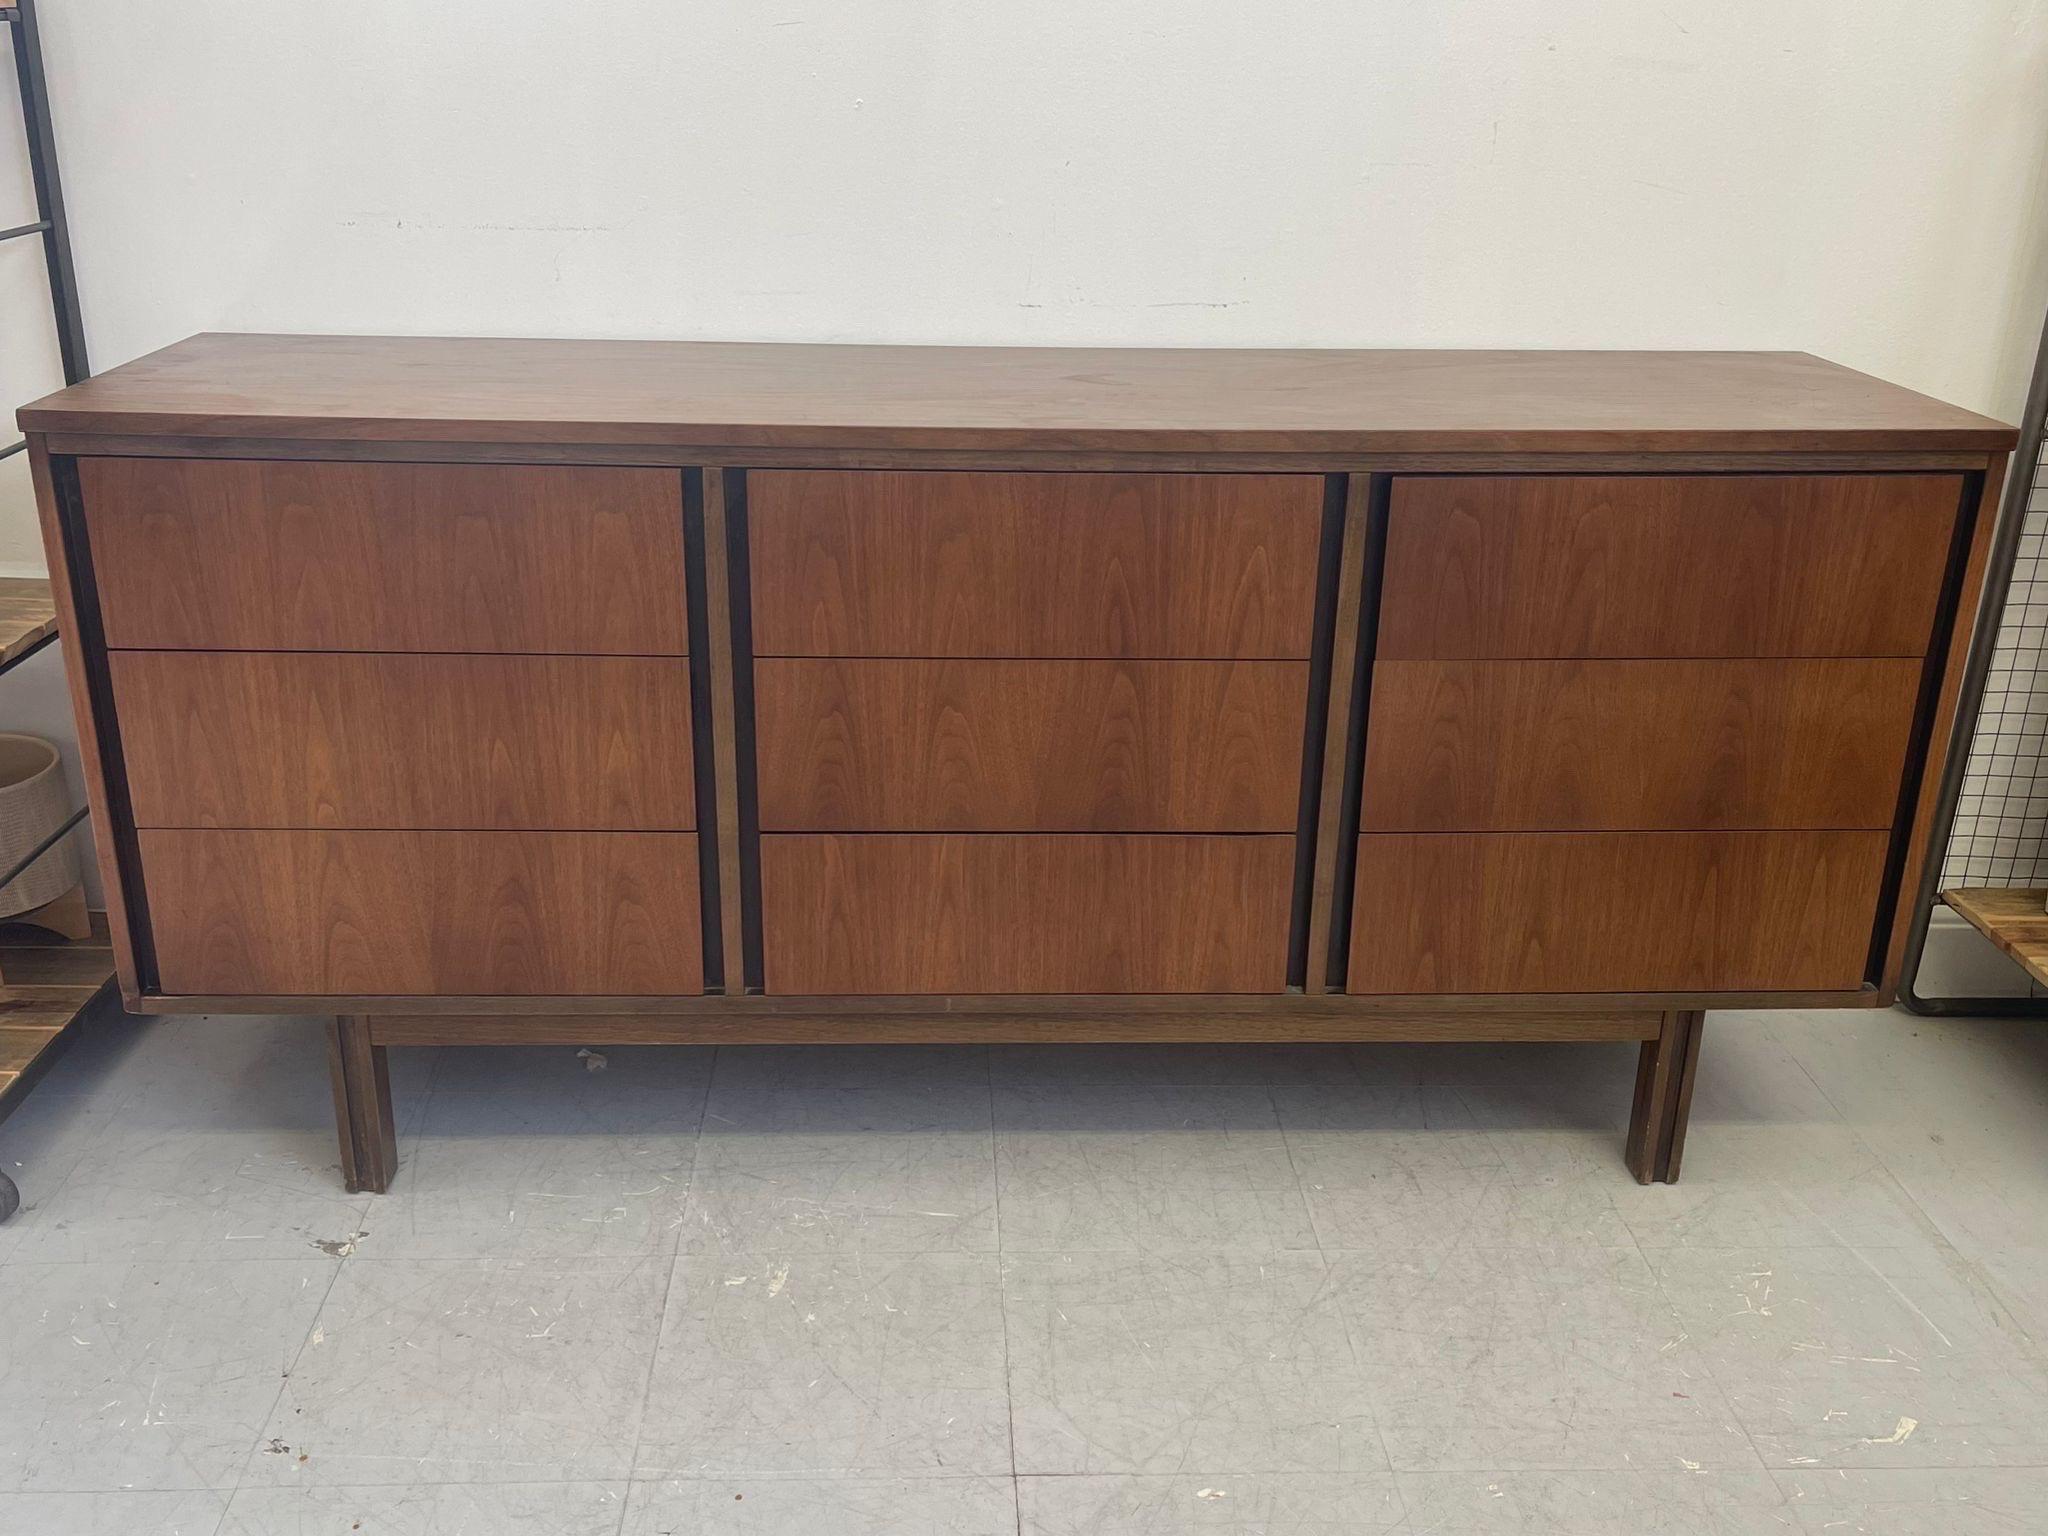 9 drawer dresser with beautiful wood grain and wood carved handles. Makers mark in the back of the drawer. Vintage Condition Consistent with Age as Pictured.

Dimensions. 66 W ; 18 D ; 30 H